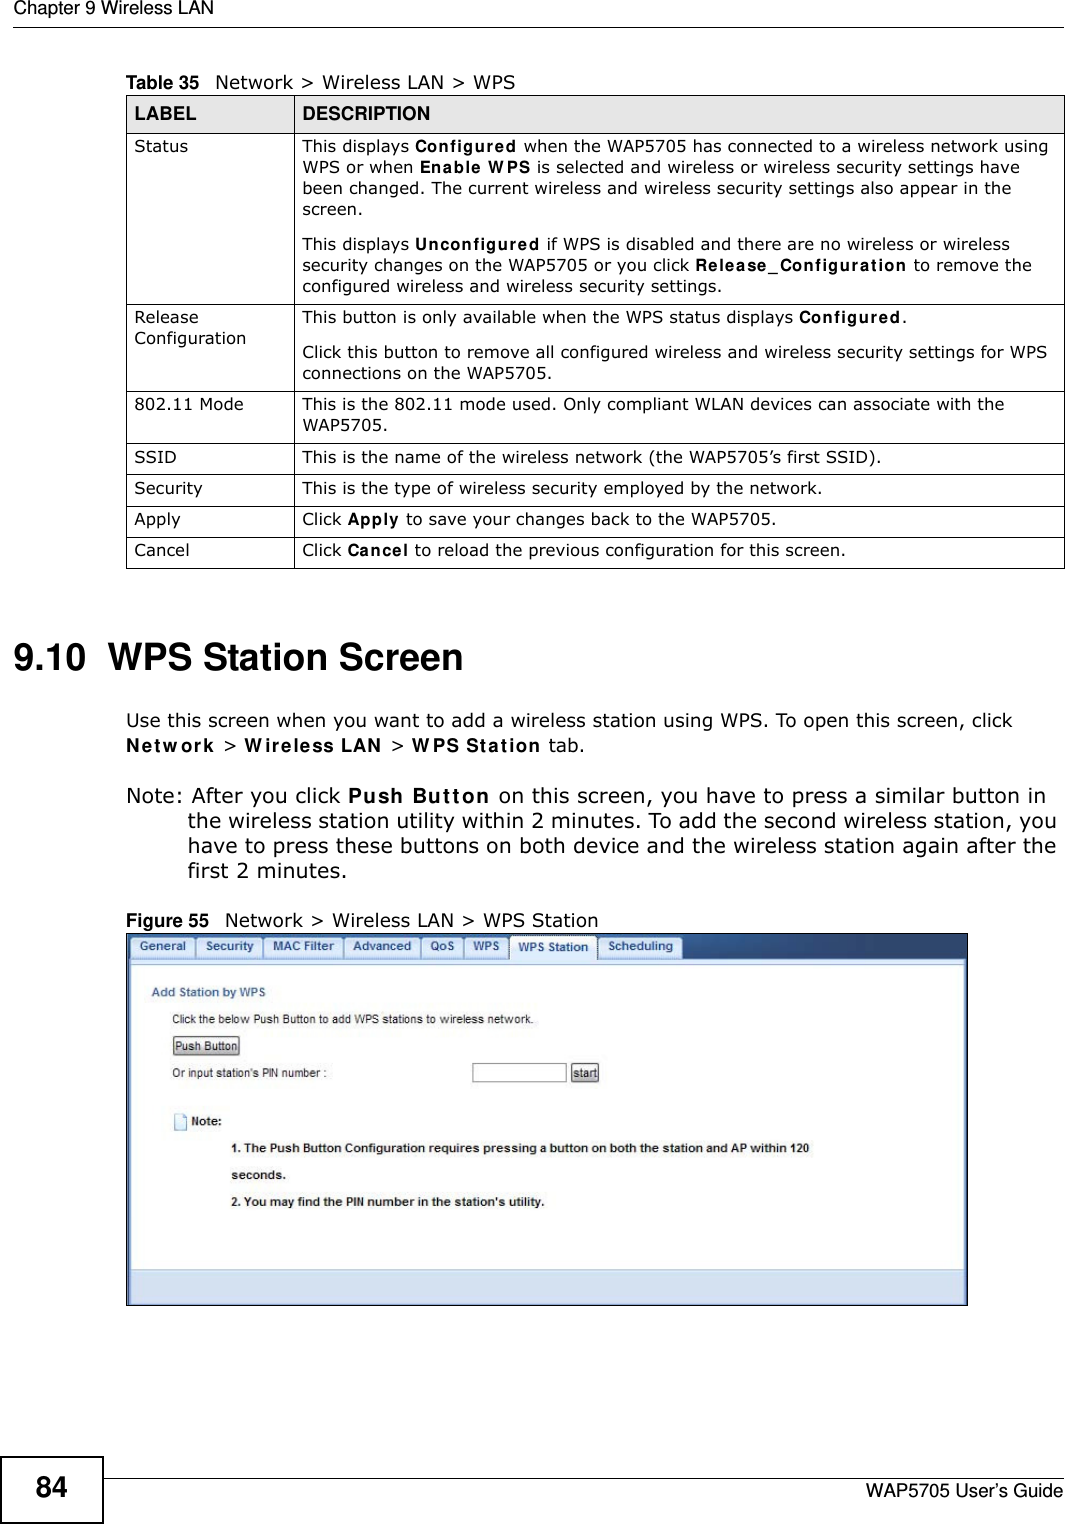 Chapter 9 Wireless LANWAP5705 User’s Guide849.10  WPS Station Screen  Use this screen when you want to add a wireless station using WPS. To open this screen, click N e t w o rk  &gt; W ir e less LAN  &gt; W PS St at ion tab.Note: After you click Push Bu t ton on this screen, you have to press a similar button in the wireless station utility within 2 minutes. To add the second wireless station, you have to press these buttons on both device and the wireless station again after the first 2 minutes.Figure 55   Network &gt; Wireless LAN &gt; WPS StationStatus This displays Configu re d when the WAP5705 has connected to a wireless network using WPS or when Ena ble  W PS is selected and wireless or wireless security settings have been changed. The current wireless and wireless security settings also appear in the screen.This displays Un configur ed if WPS is disabled and there are no wireless or wireless security changes on the WAP5705 or you click Re le a se _ Co nf igu ra t ion  to remove the configured wireless and wireless security settings.Release ConfigurationThis button is only available when the WPS status displays Con figur ed .Click this button to remove all configured wireless and wireless security settings for WPS connections on the WAP5705.802.11 Mode This is the 802.11 mode used. Only compliant WLAN devices can associate with the WAP5705.SSID This is the name of the wireless network (the WAP5705’s first SSID).Security This is the type of wireless security employed by the network.Apply Click Apply to save your changes back to the WAP5705.Cancel Click Cancel to reload the previous configuration for this screen.Table 35   Network &gt; Wireless LAN &gt; WPSLABEL DESCRIPTION